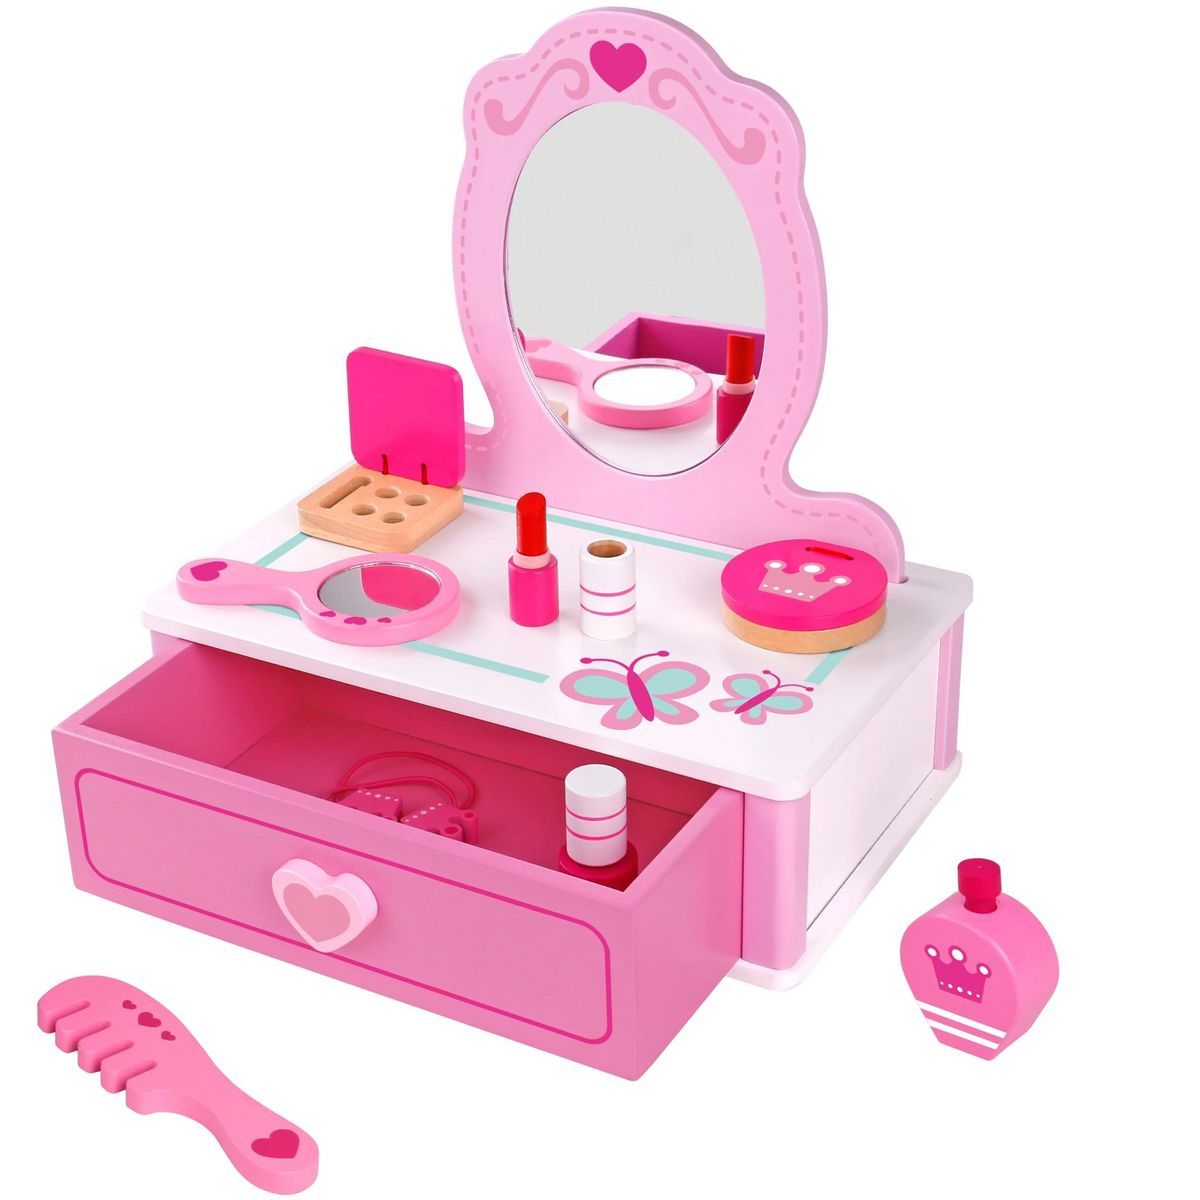 Toysters Adorable Pink Wooden Vanity Makeup Kit Station Beauty Salon Cosmetic Toy For Toddler Gir... | Target